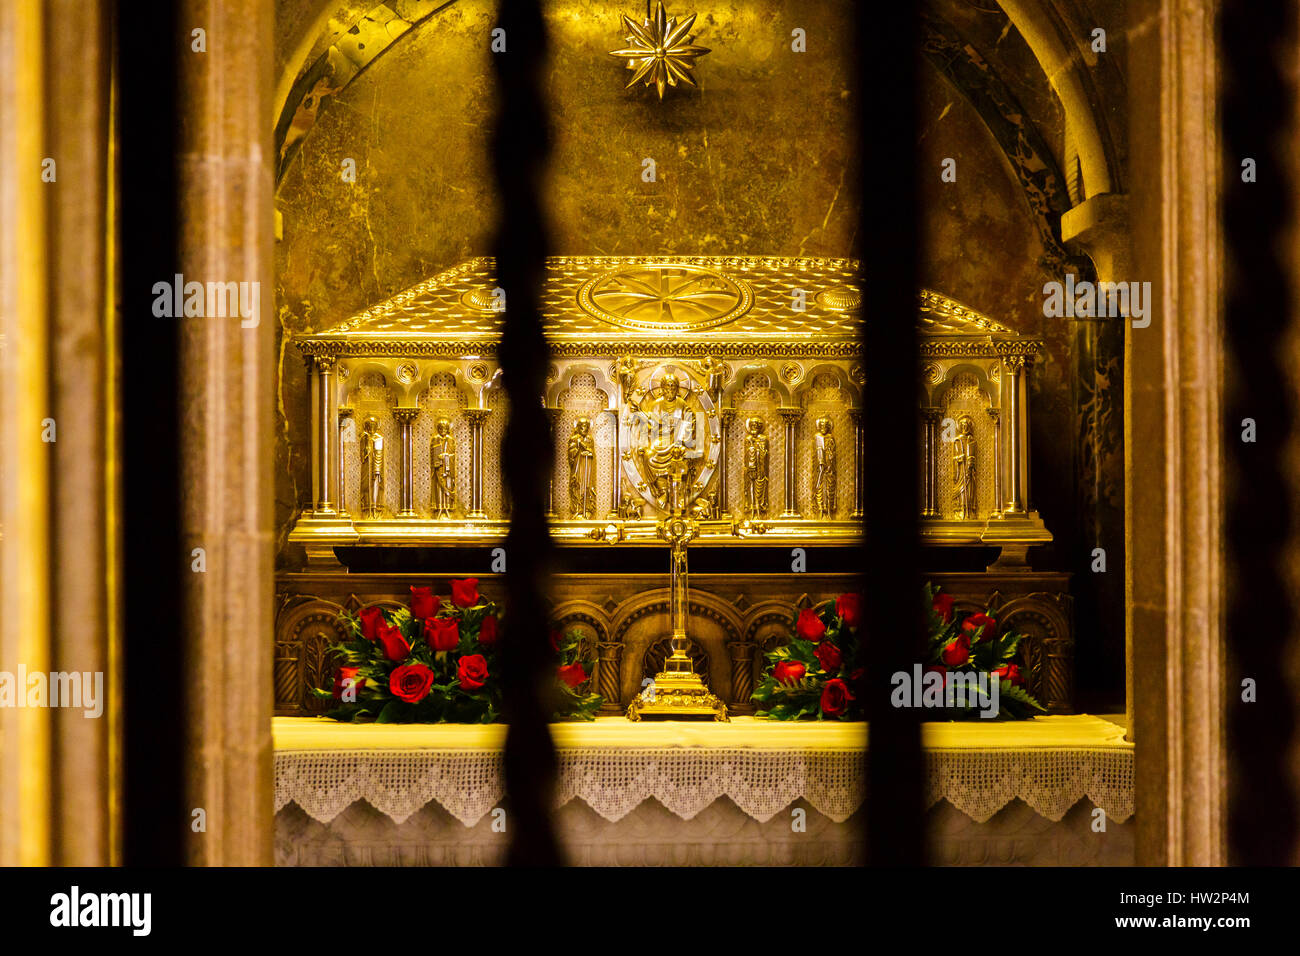 Relics of St. James. Stock Photo